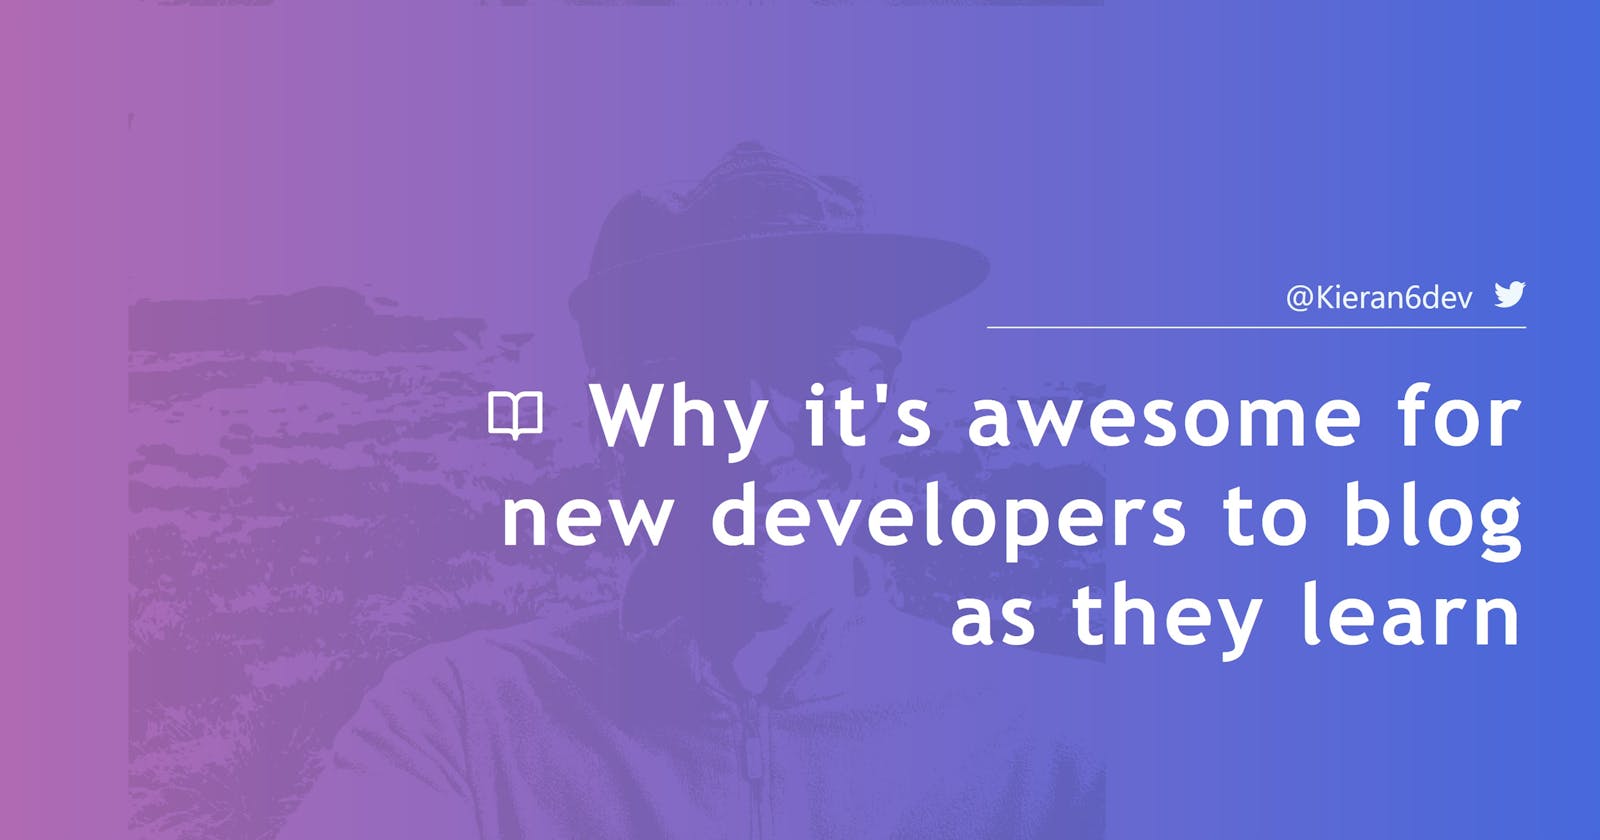 Why it's awesome for new developers to blog as they learn